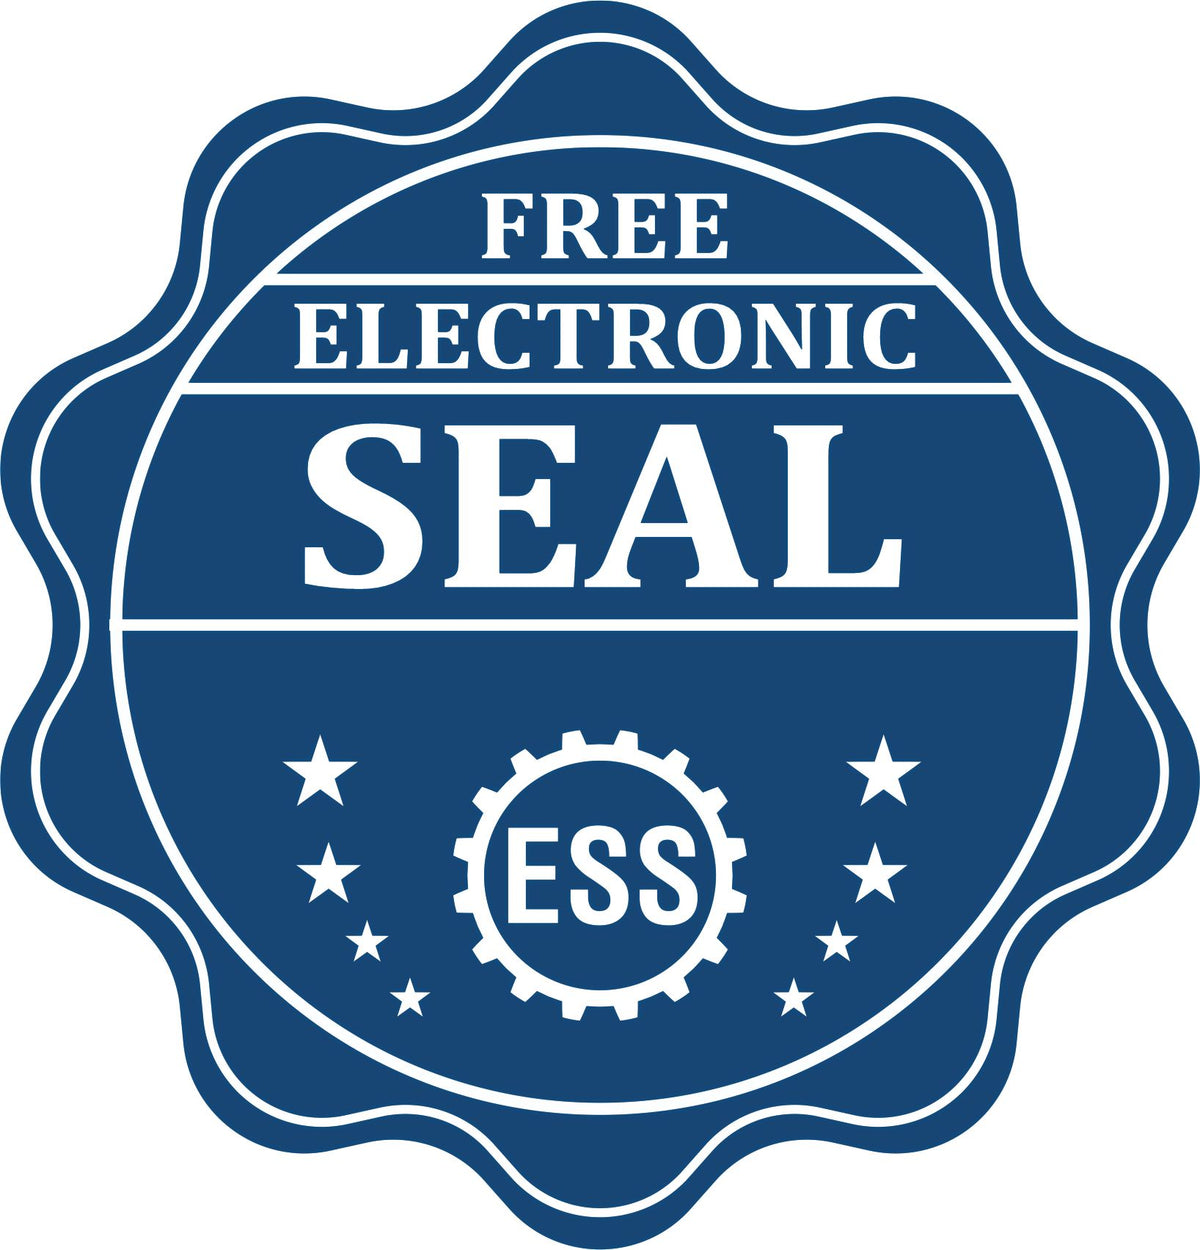 A badge showing a free electronic seal for the Soft New Mexico Professional Geologist Seal with stars and the ESS gear on the emblem.